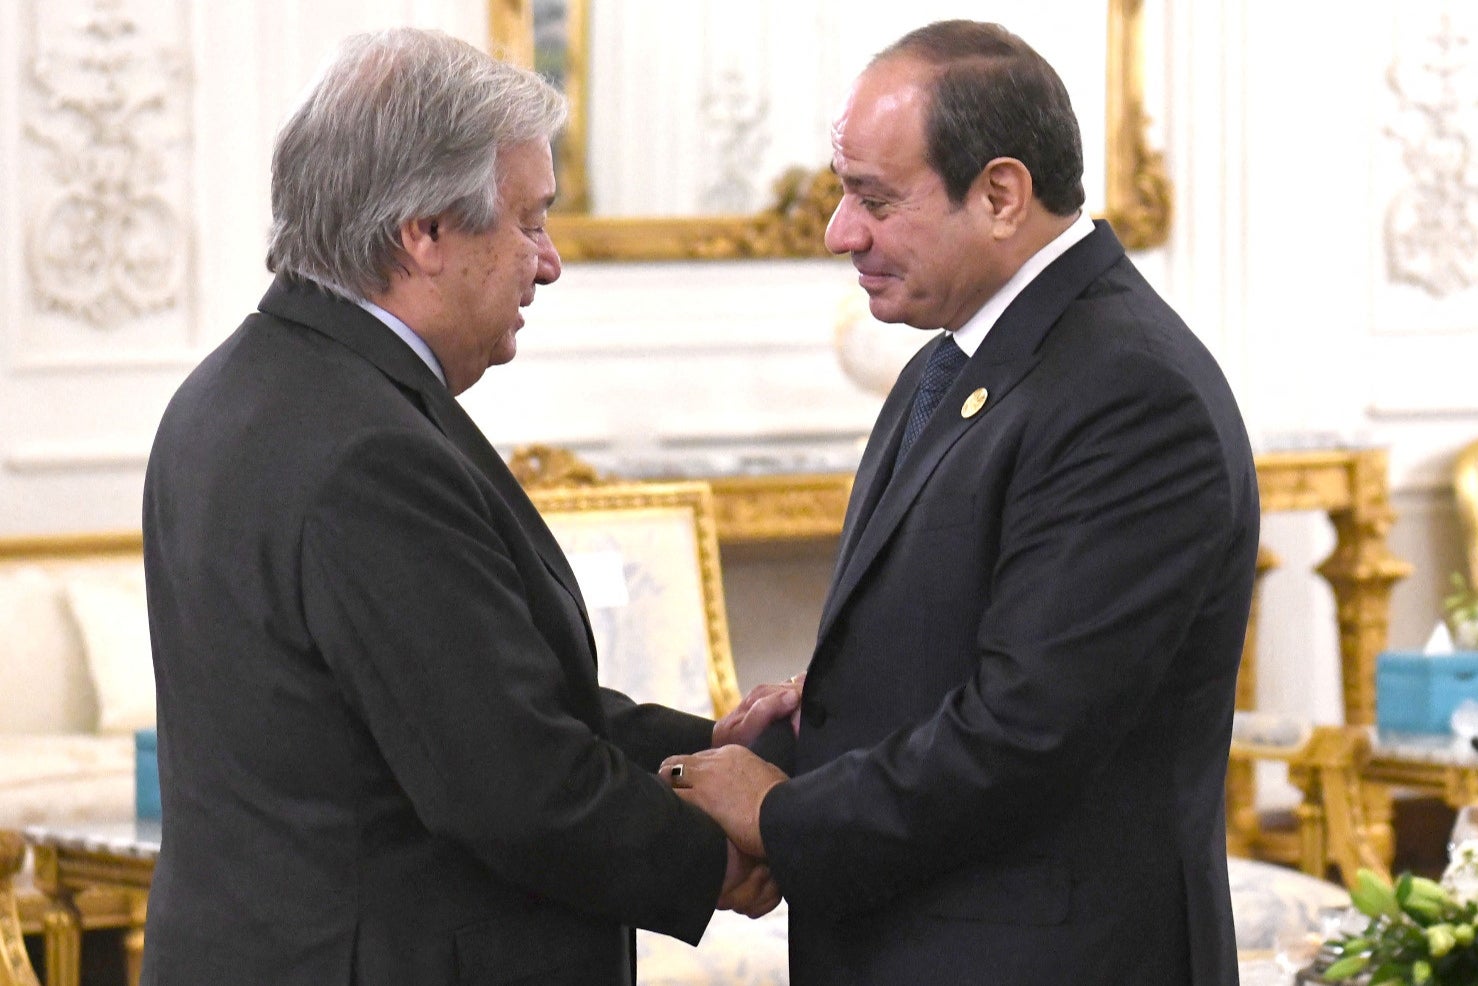 Egyptian president Abdel Fattah al-Sisi greets United Nations Secretary-General Antonio Guterres during the Cairo international summit for peace in the Middle East